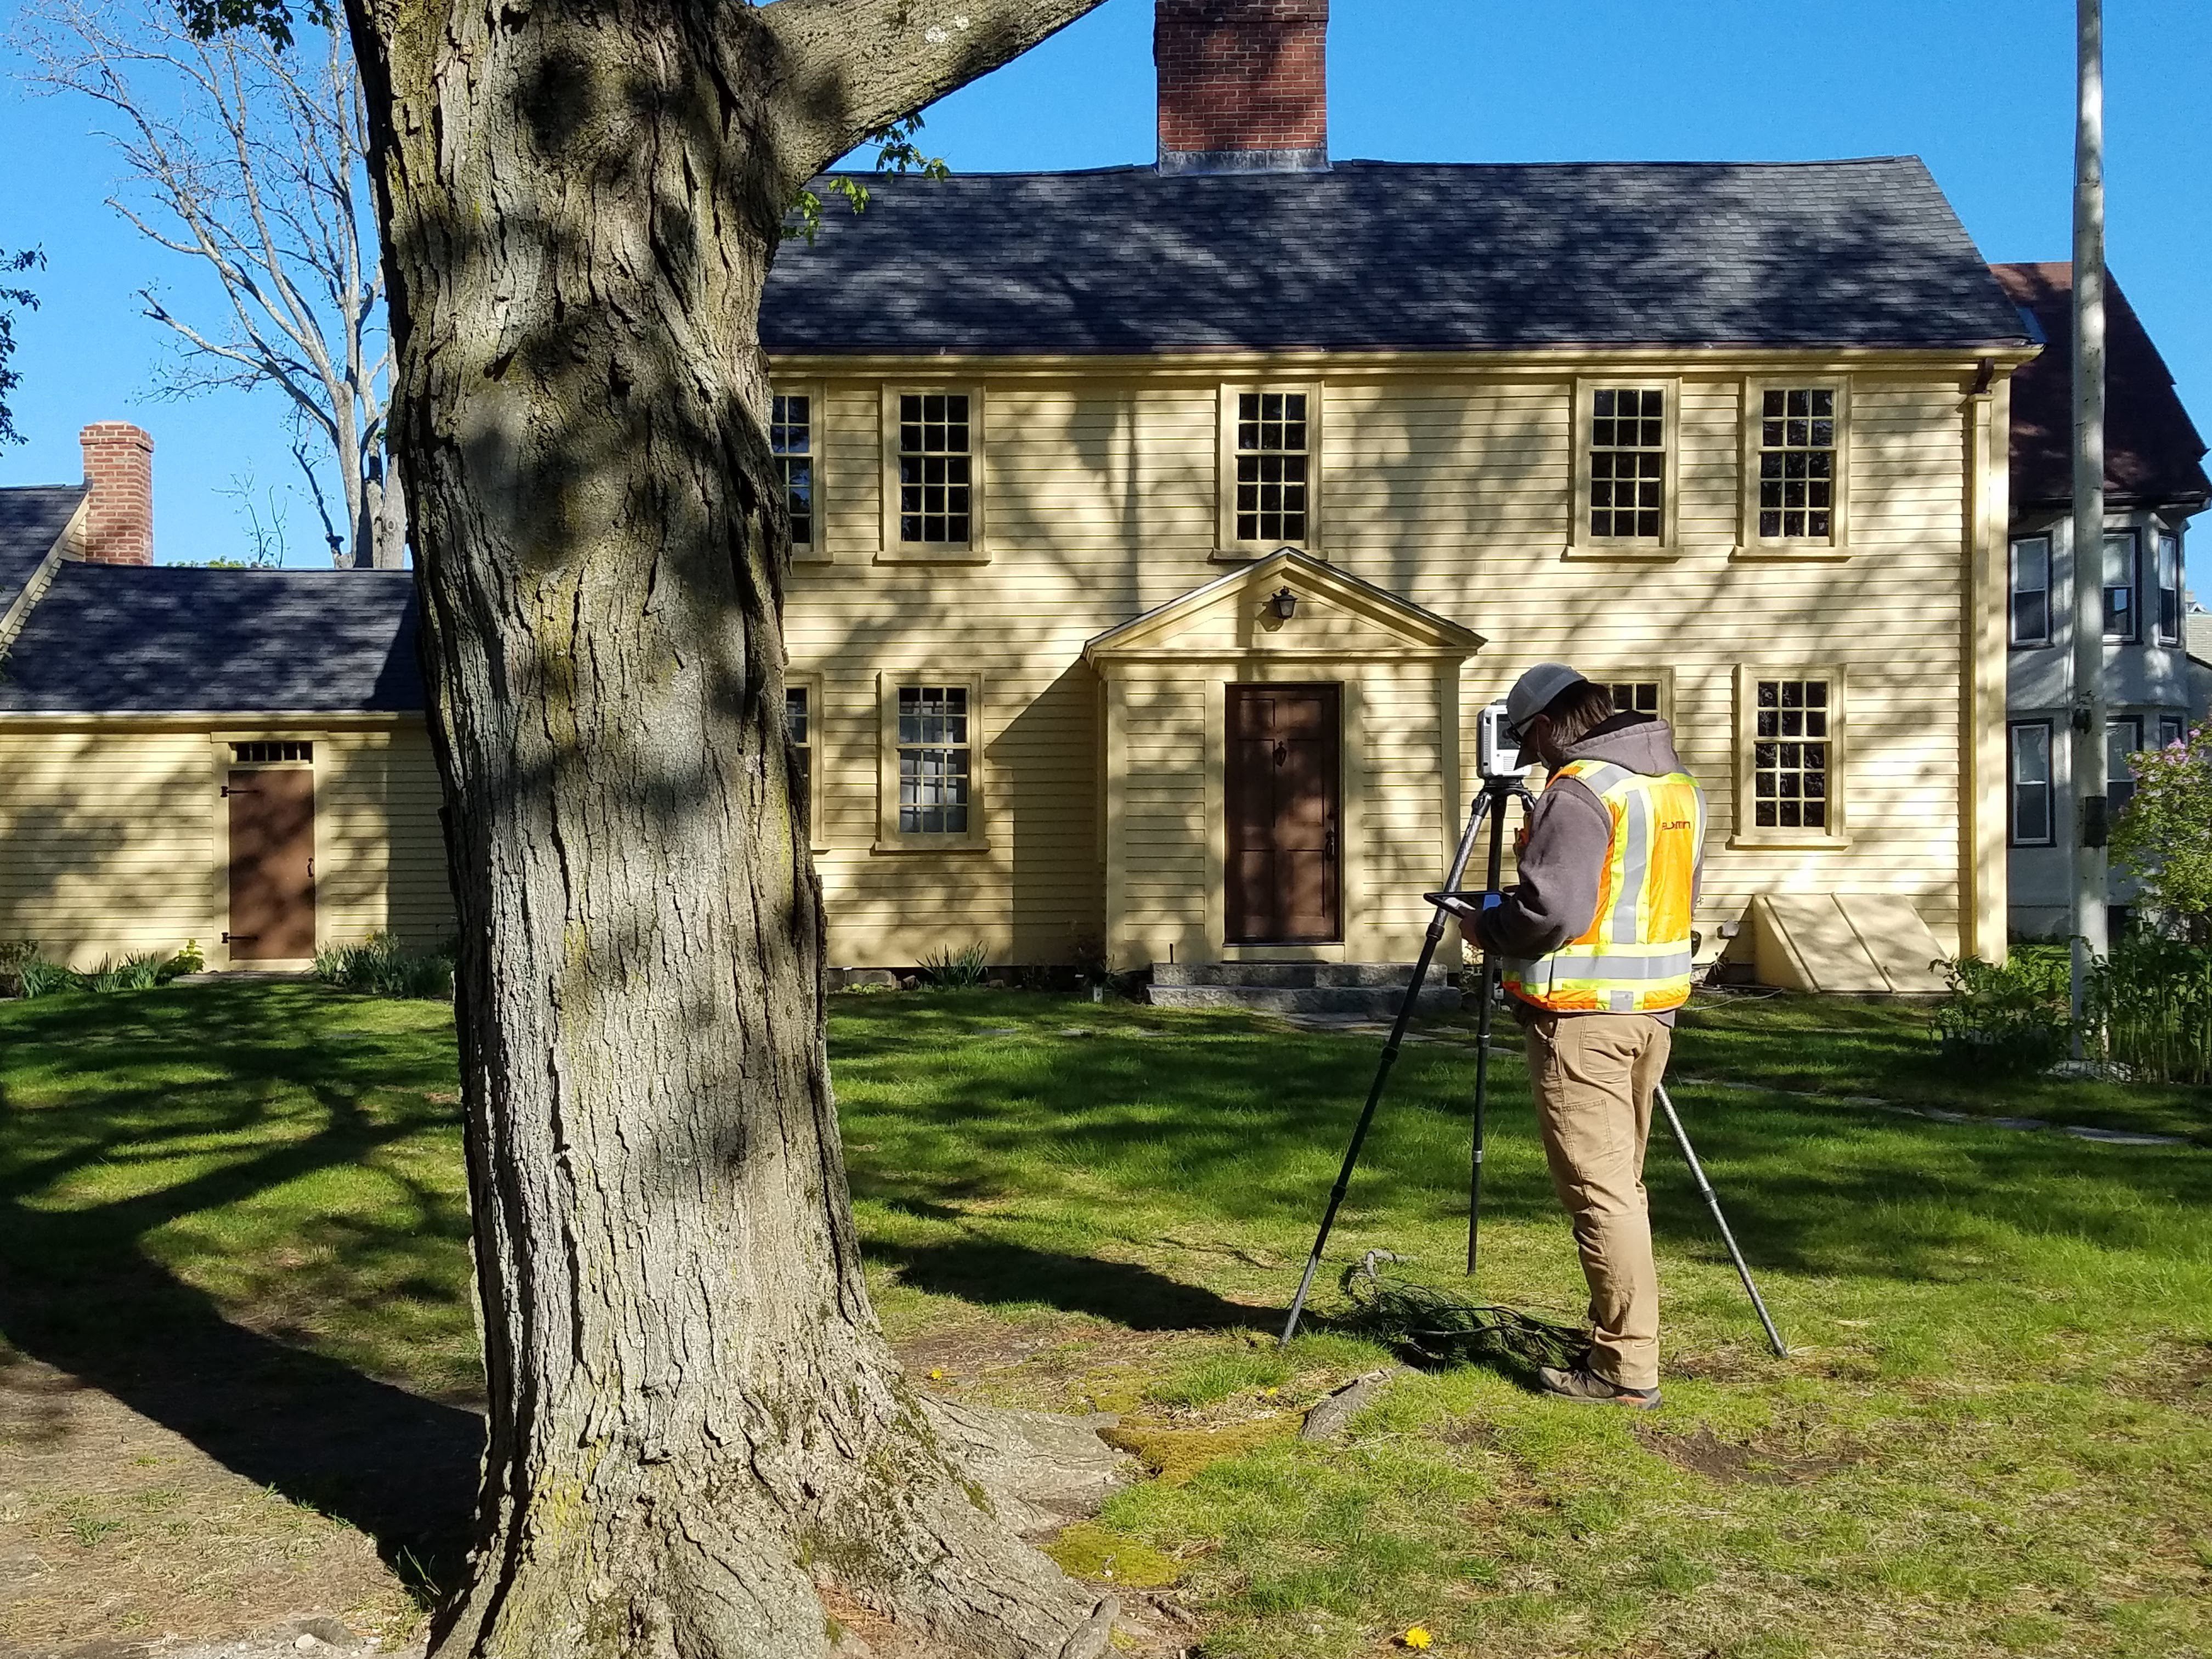 Technicians from Feldman Surveyors conducted a laser scan of the Jason Russell House and grounds May 14 and 15, 2020. A limited crew size enabled working within physical distancing guidelines. The data revealed provided deep   technical documentation of the current conditions of the house.